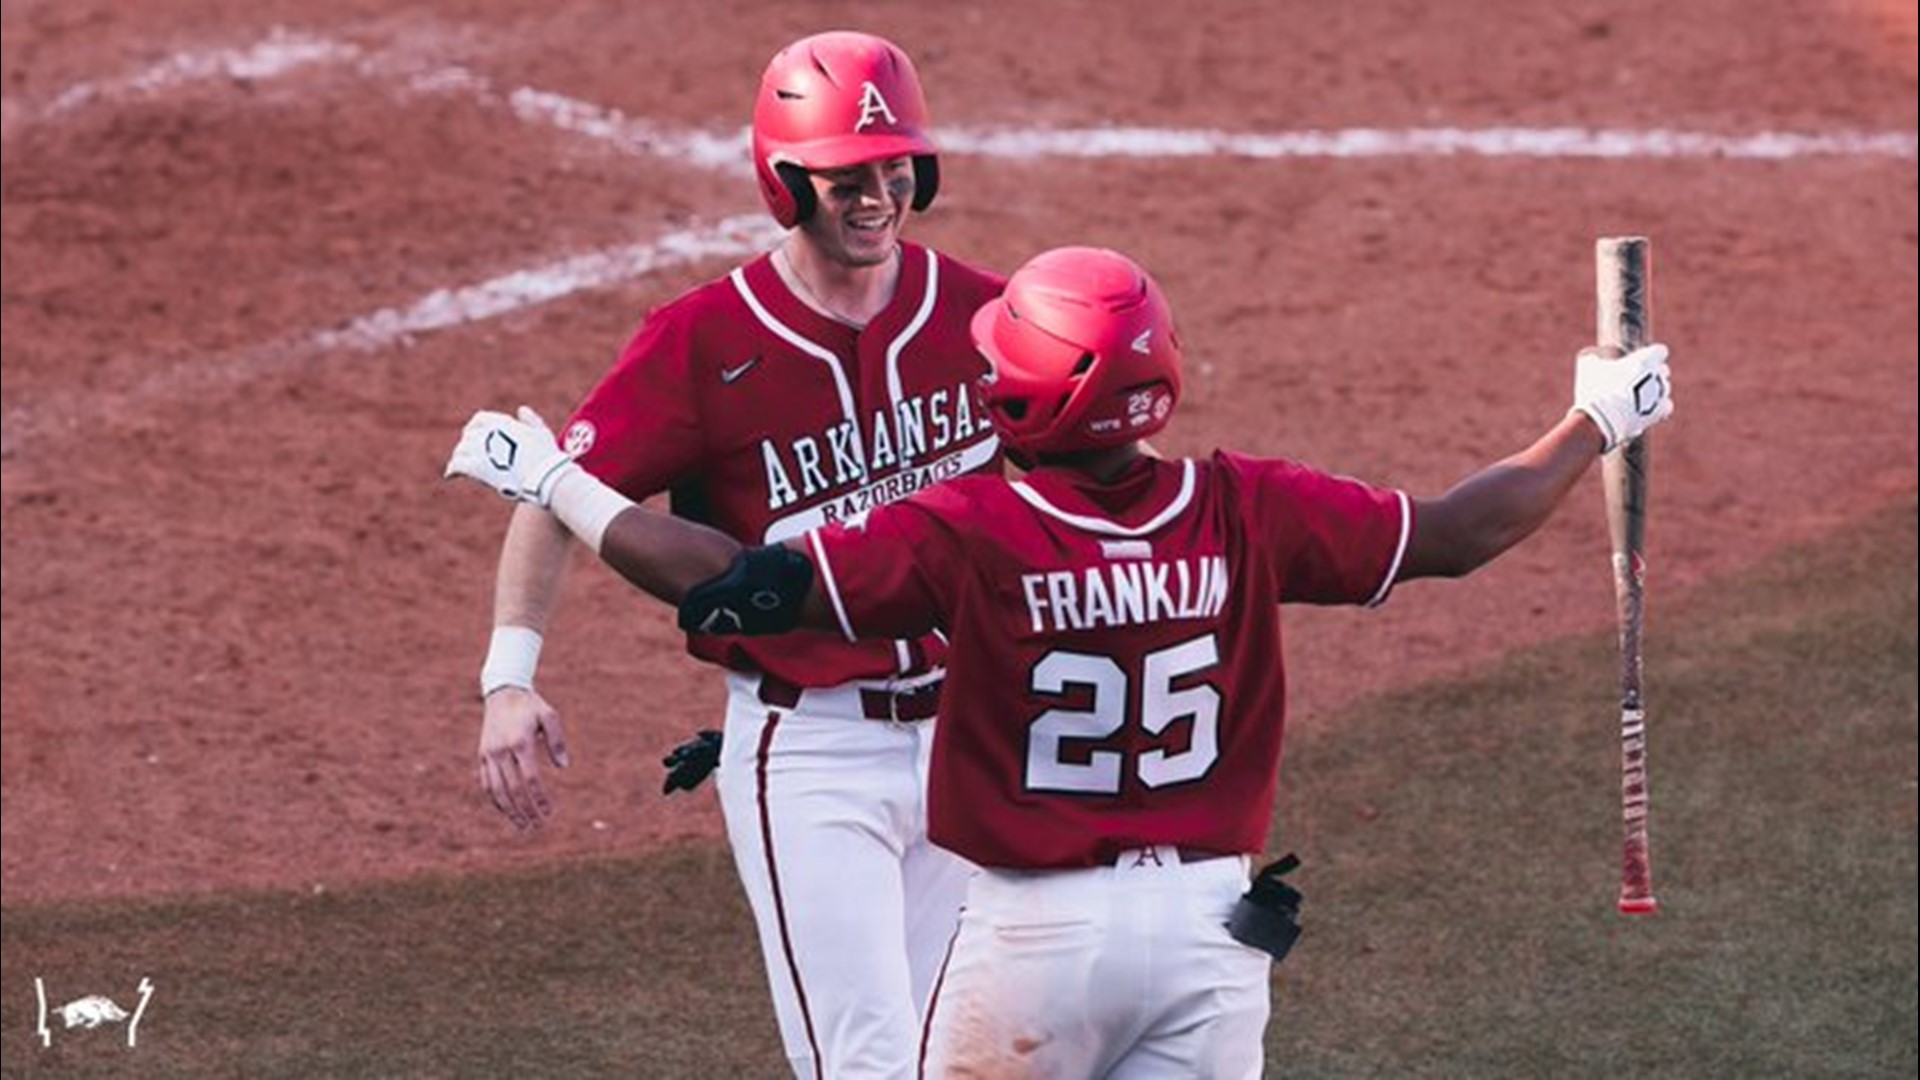 The Diamond Hogs pounded out 14 hits and launched three home runs to capture the series and secure the top spot in the SEC West